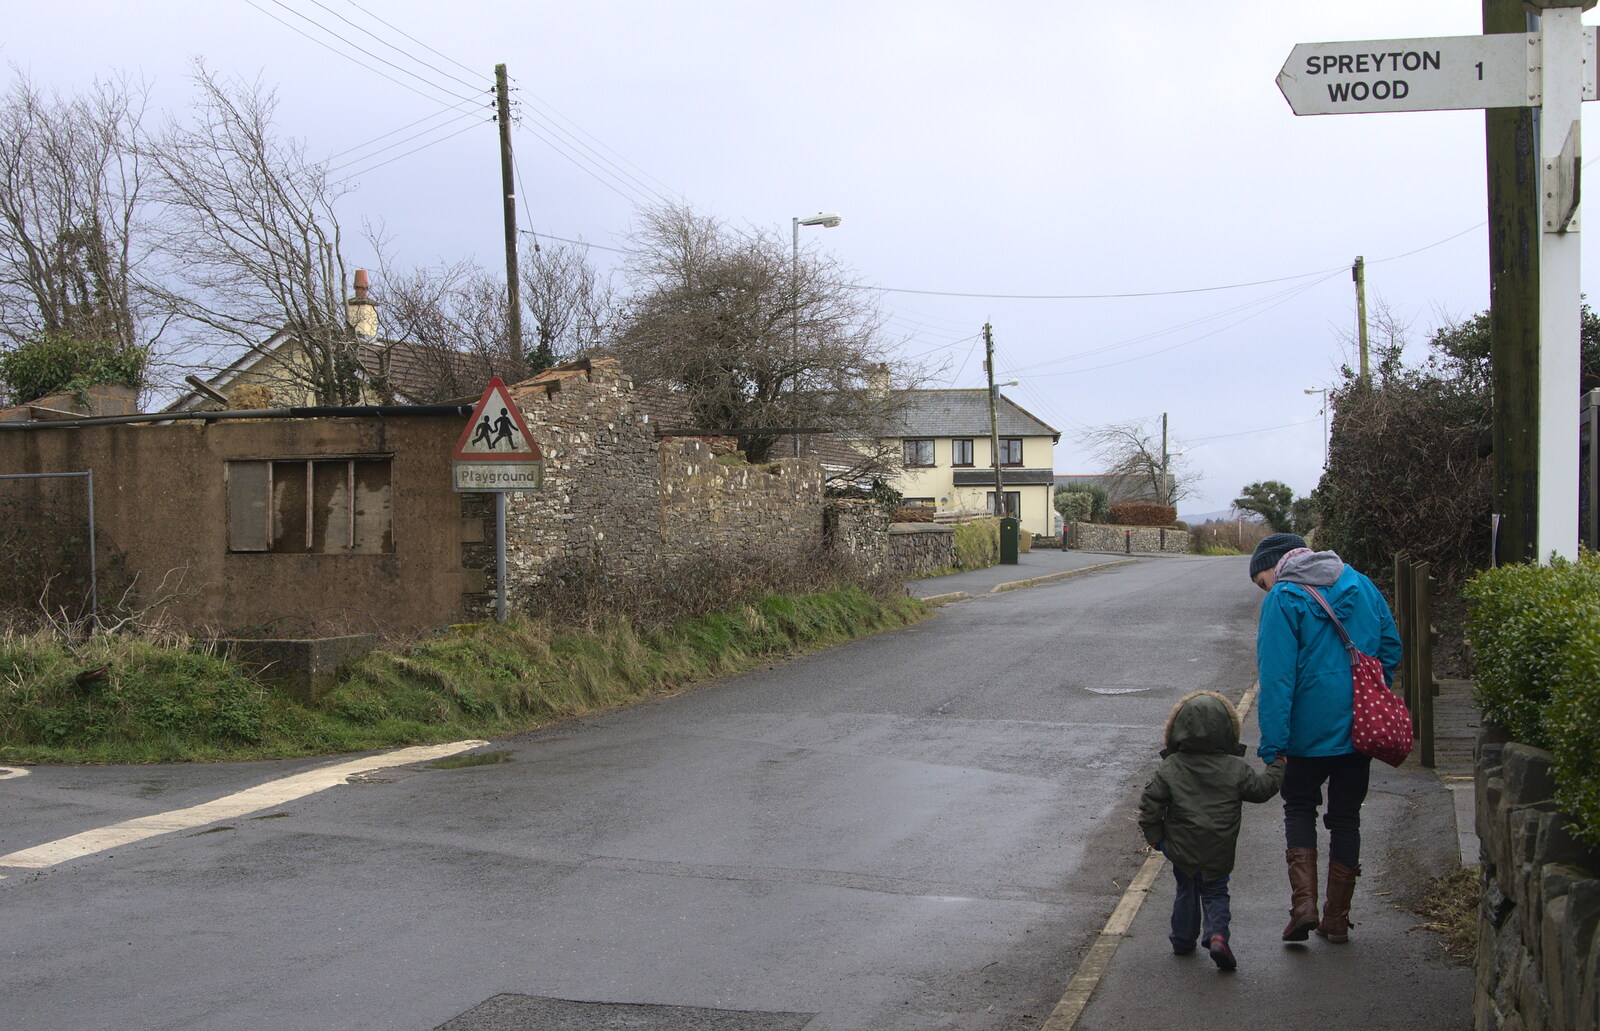 Harry and Isobel head up to the Spreyton shop from A Trip to Grandma J's, Spreyton, Devon - 18th February 2015